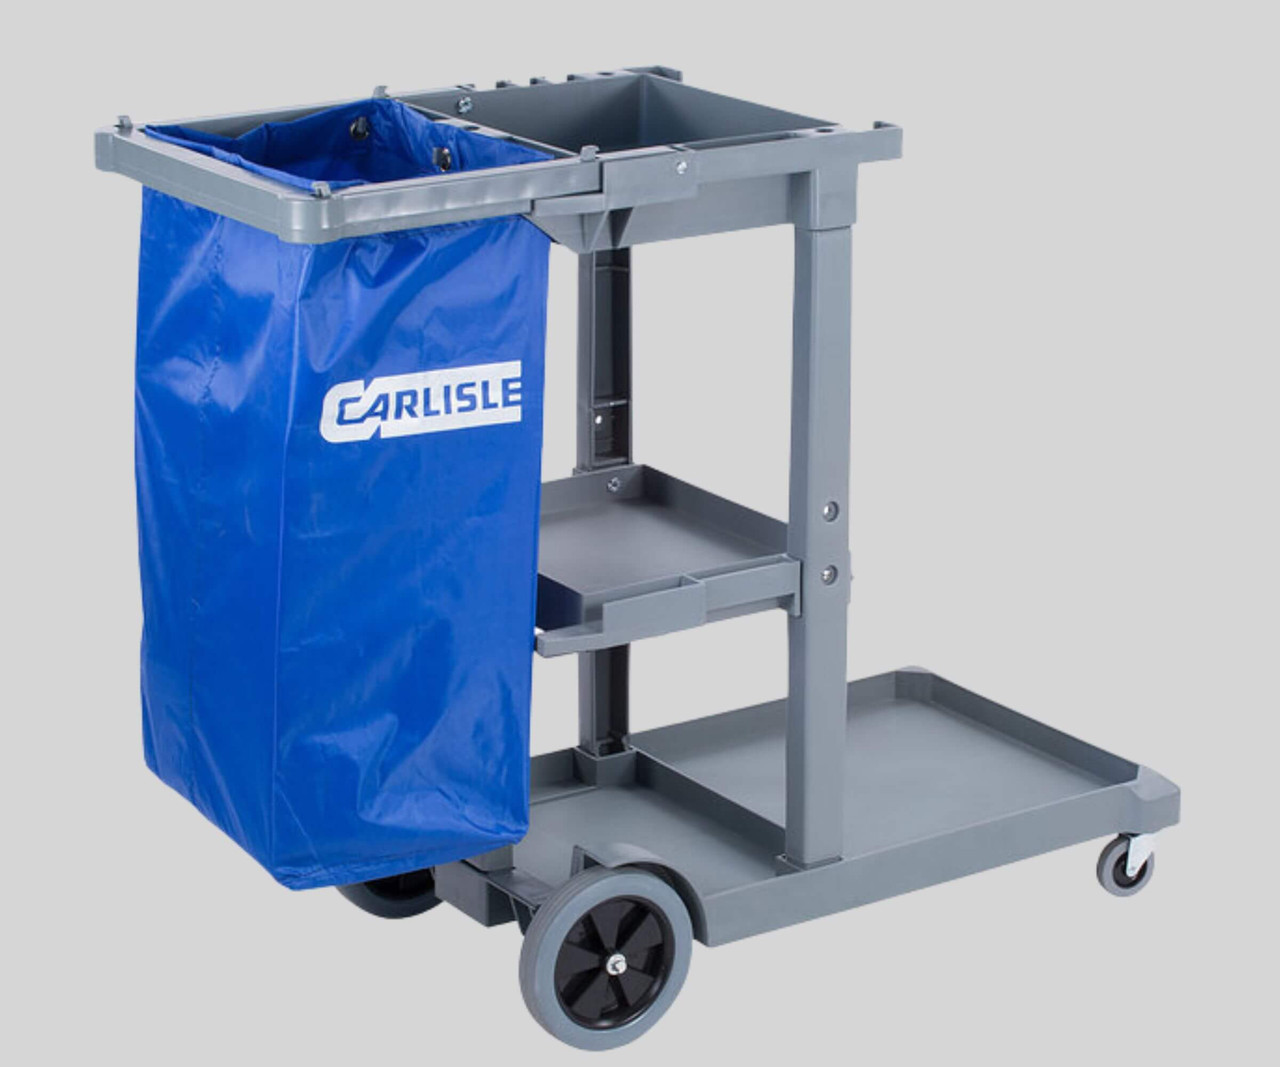 Carlisle Gray Janitor Cart - Efficient Cleaning and Organization-Chicken Pieces